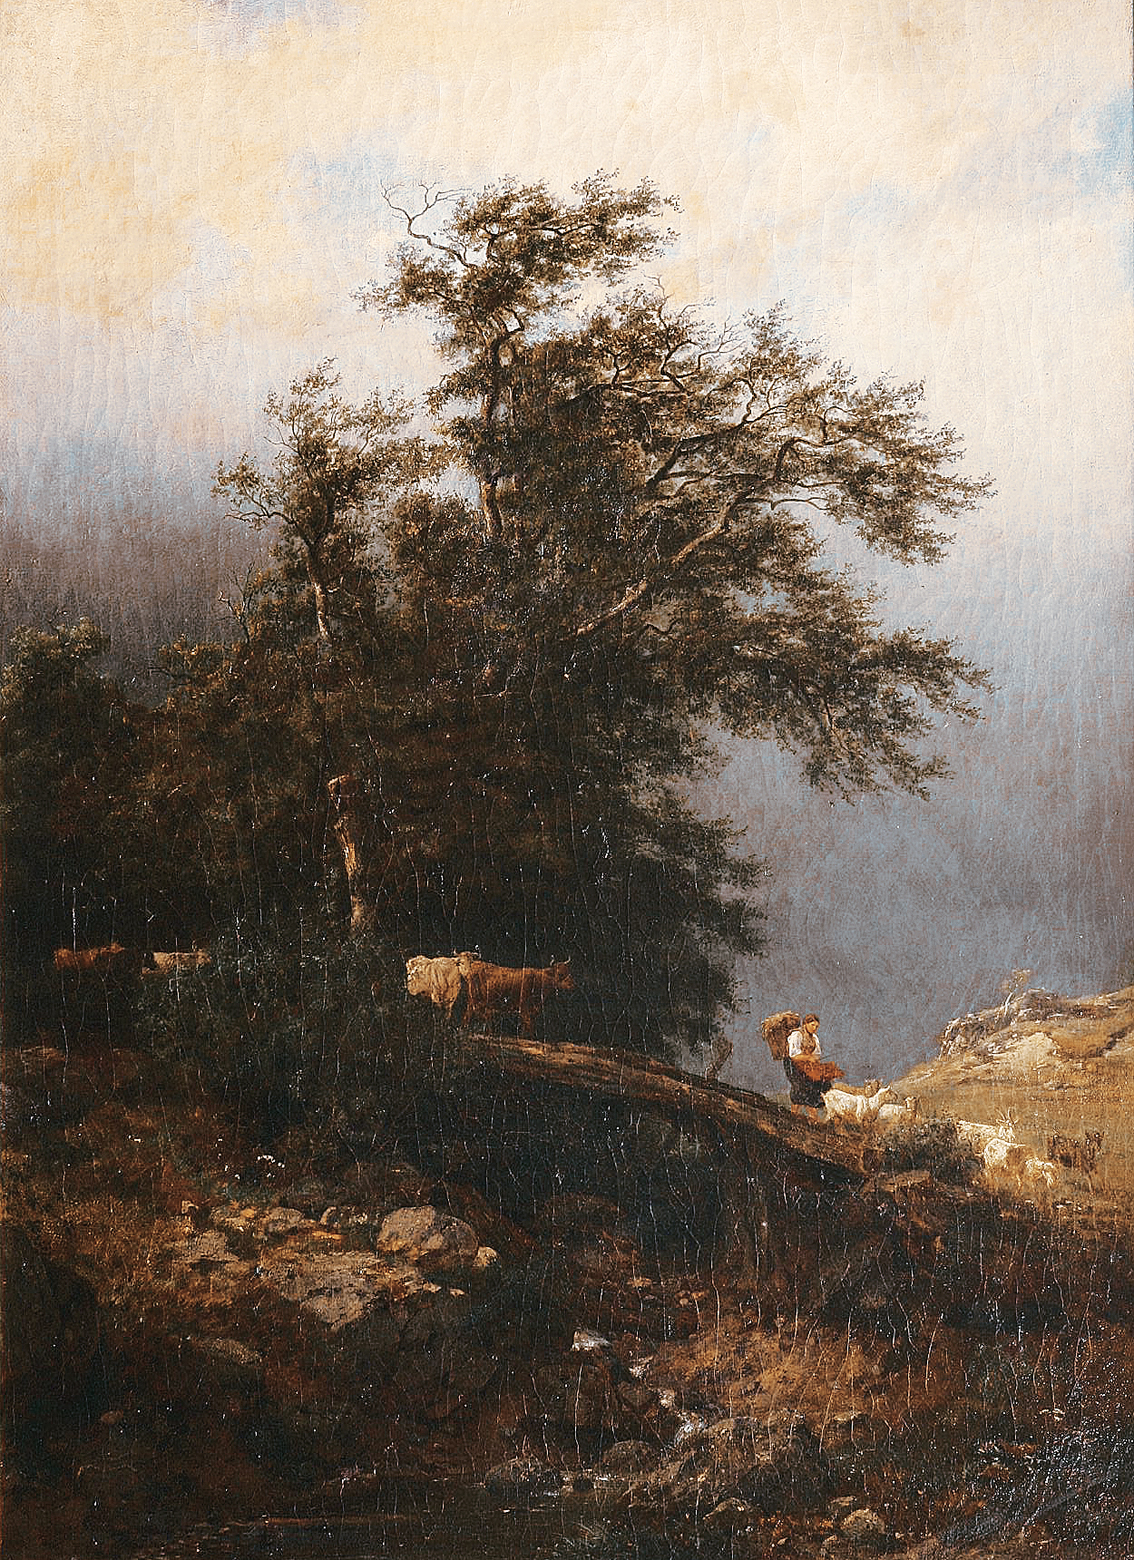 A shepherdess with cows and sheep on a bridge by a forest